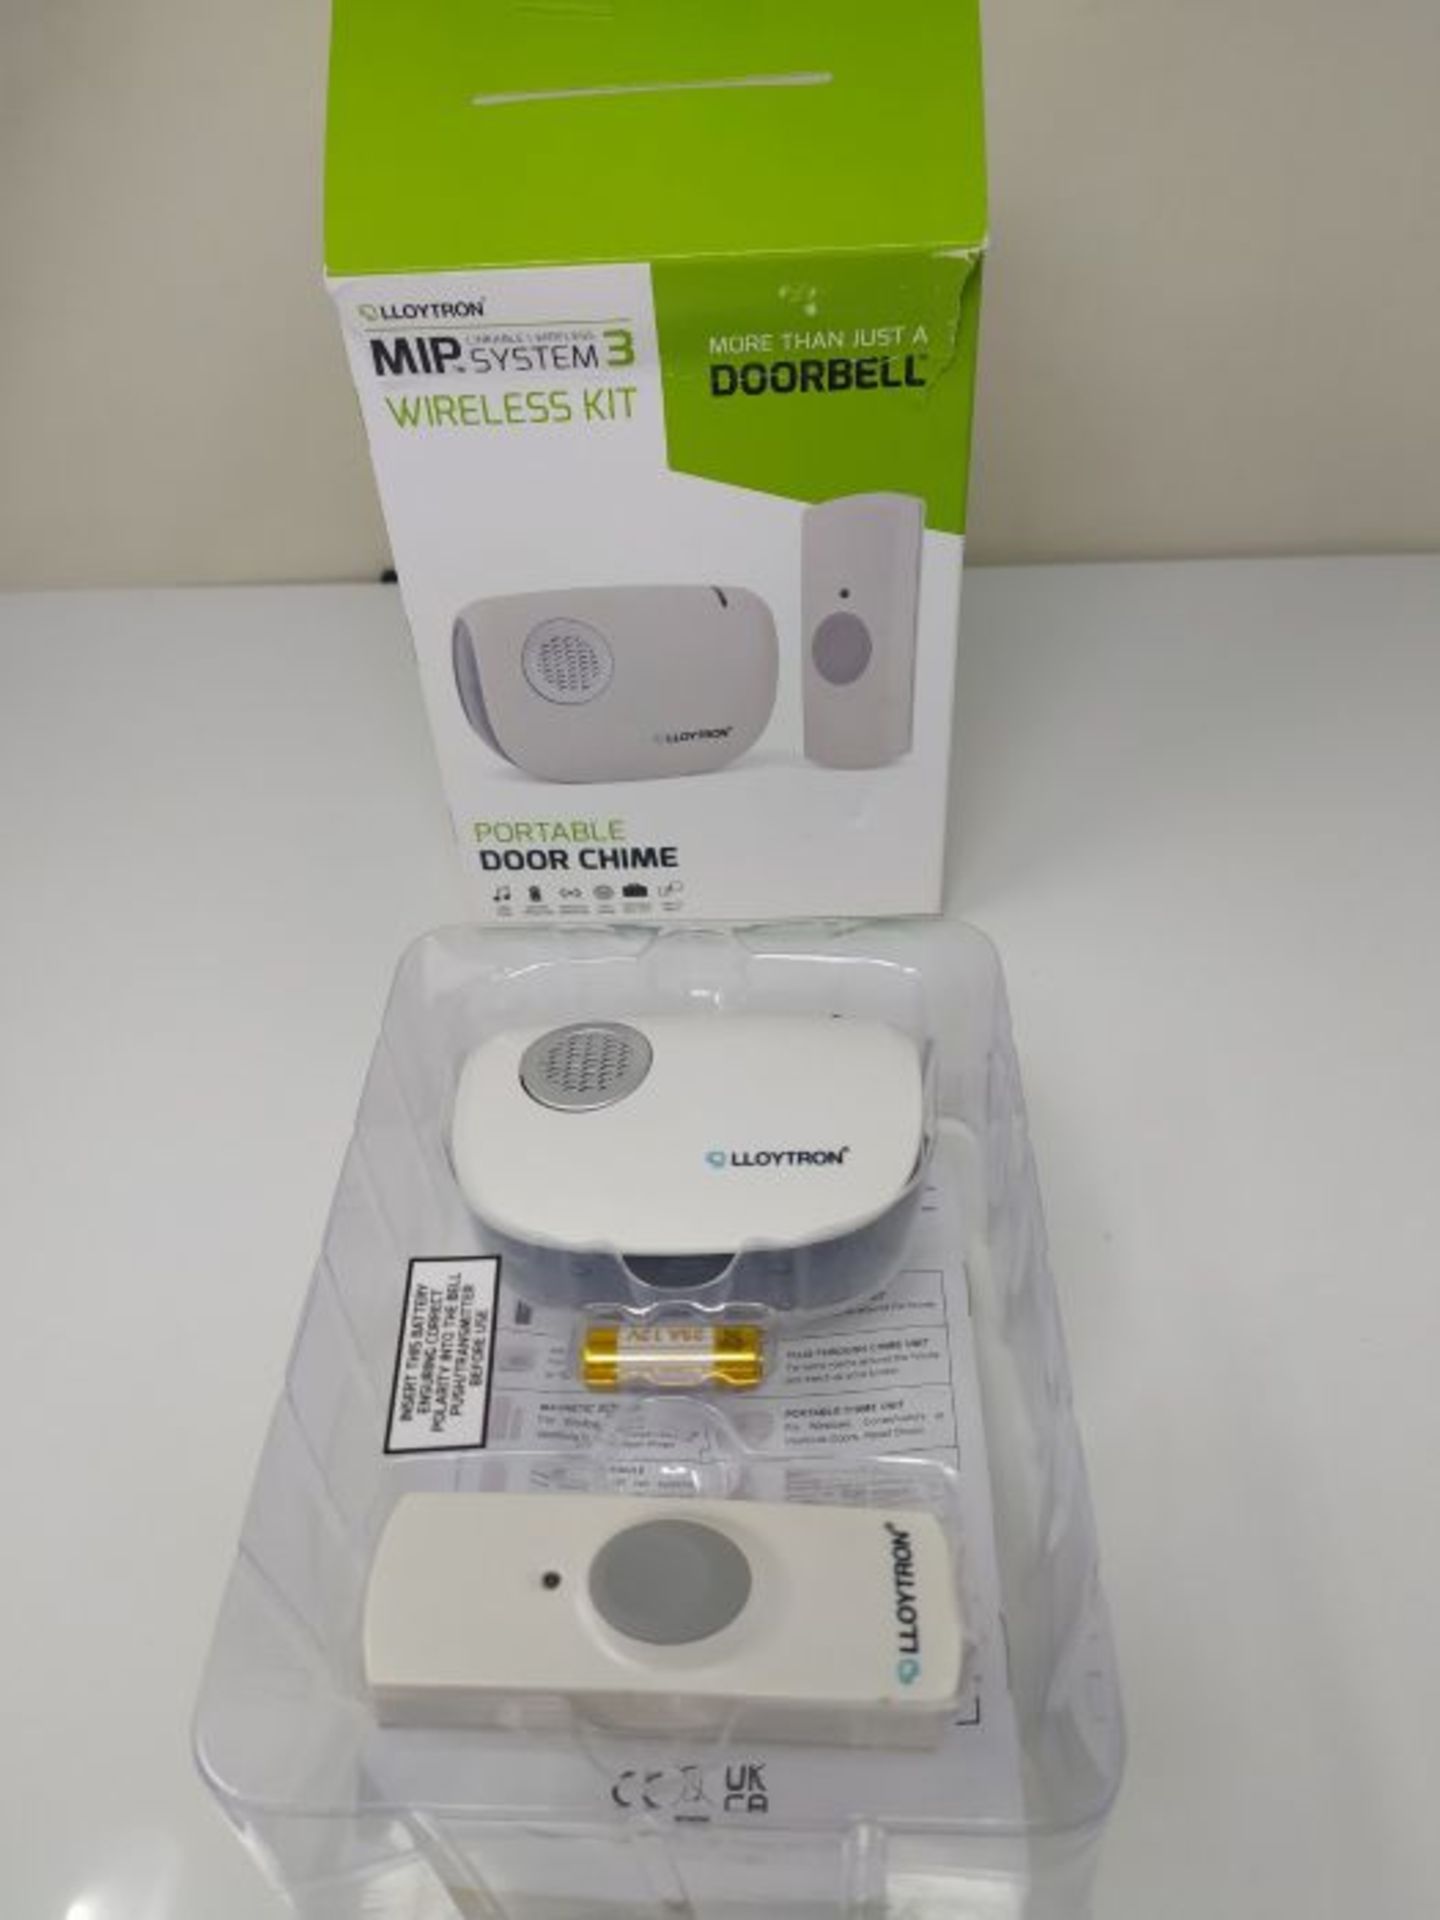 LLOYTRON® MIP System 3 Doorbell Kit with Battery Operated Chime Receiver and Bell Pus - Image 2 of 2